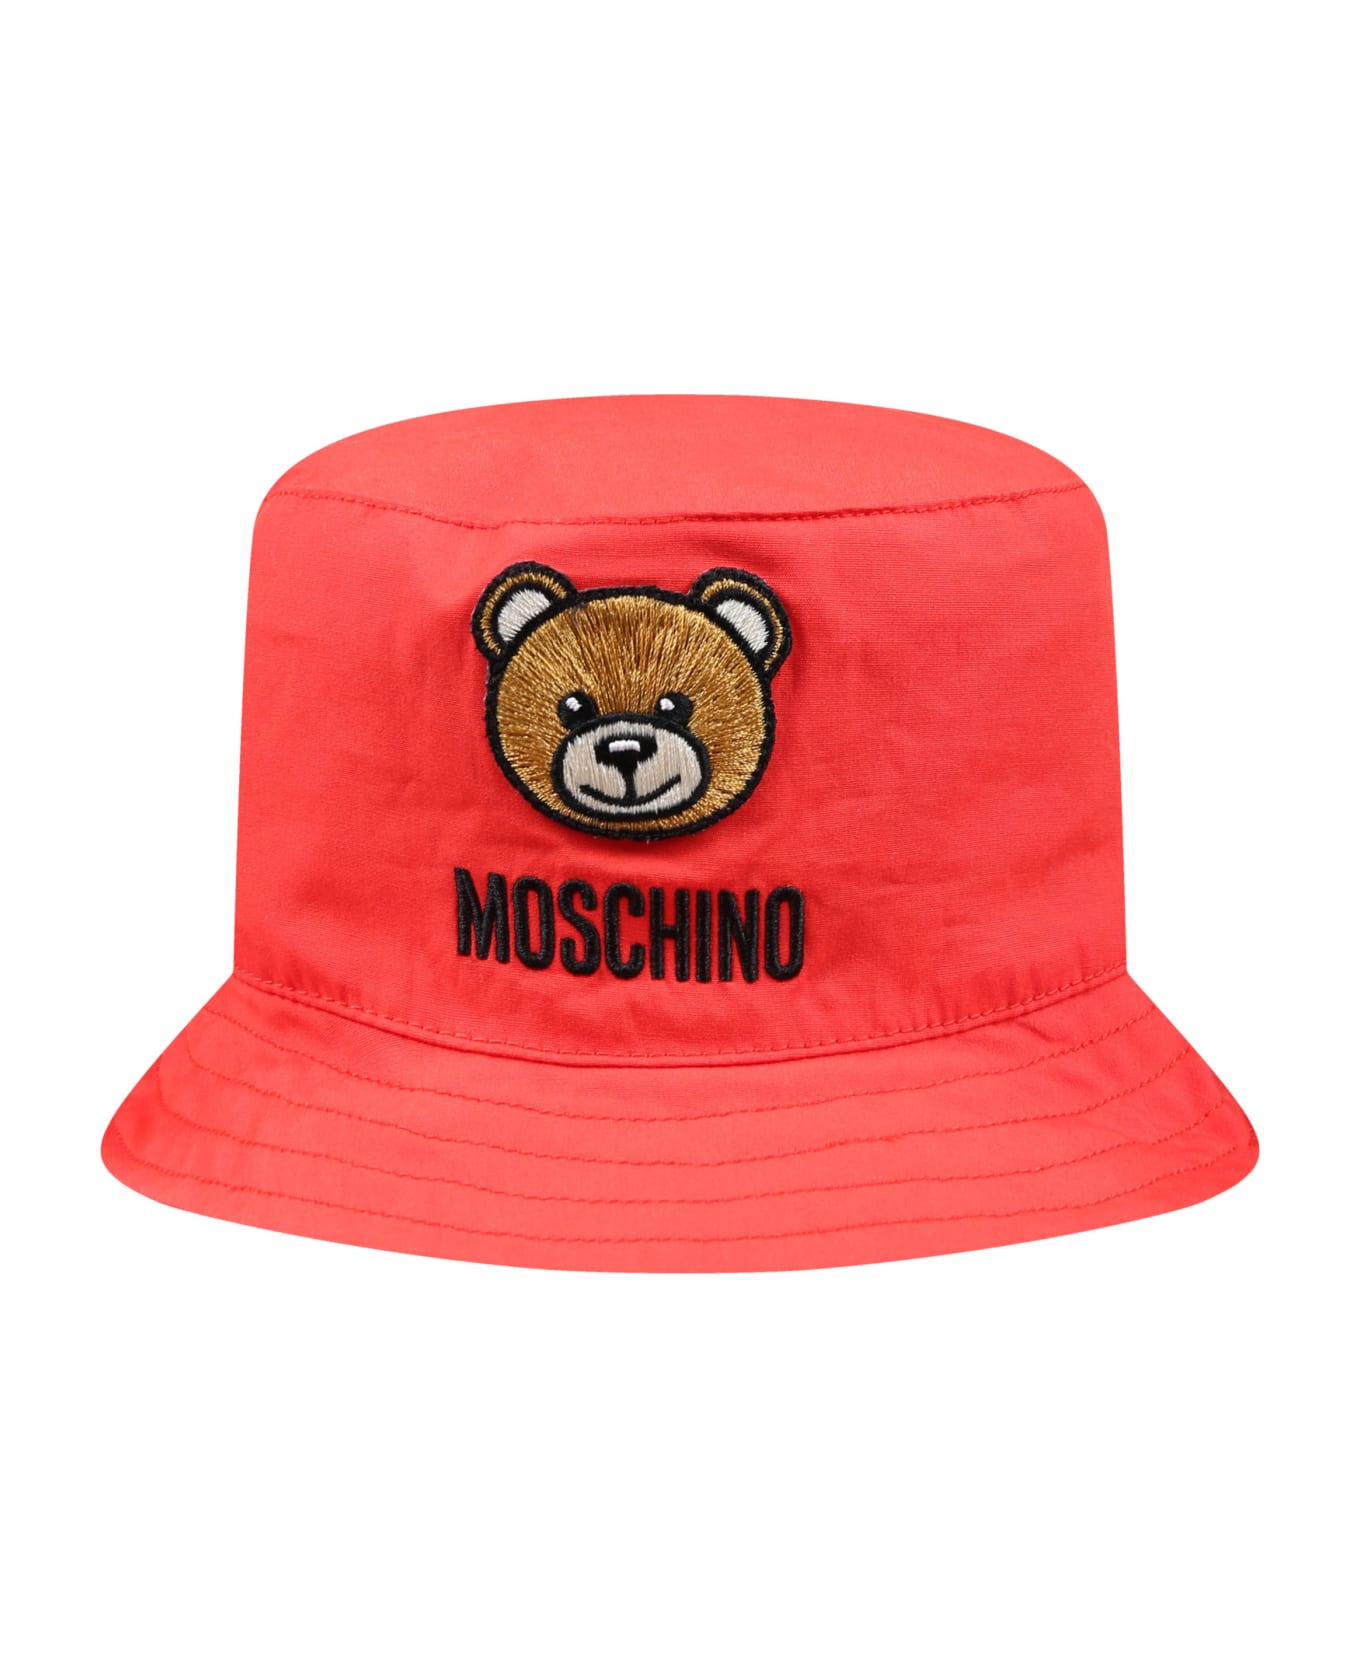 Moschino Red Cloche For Baby Kids With Teddy Bear - Red